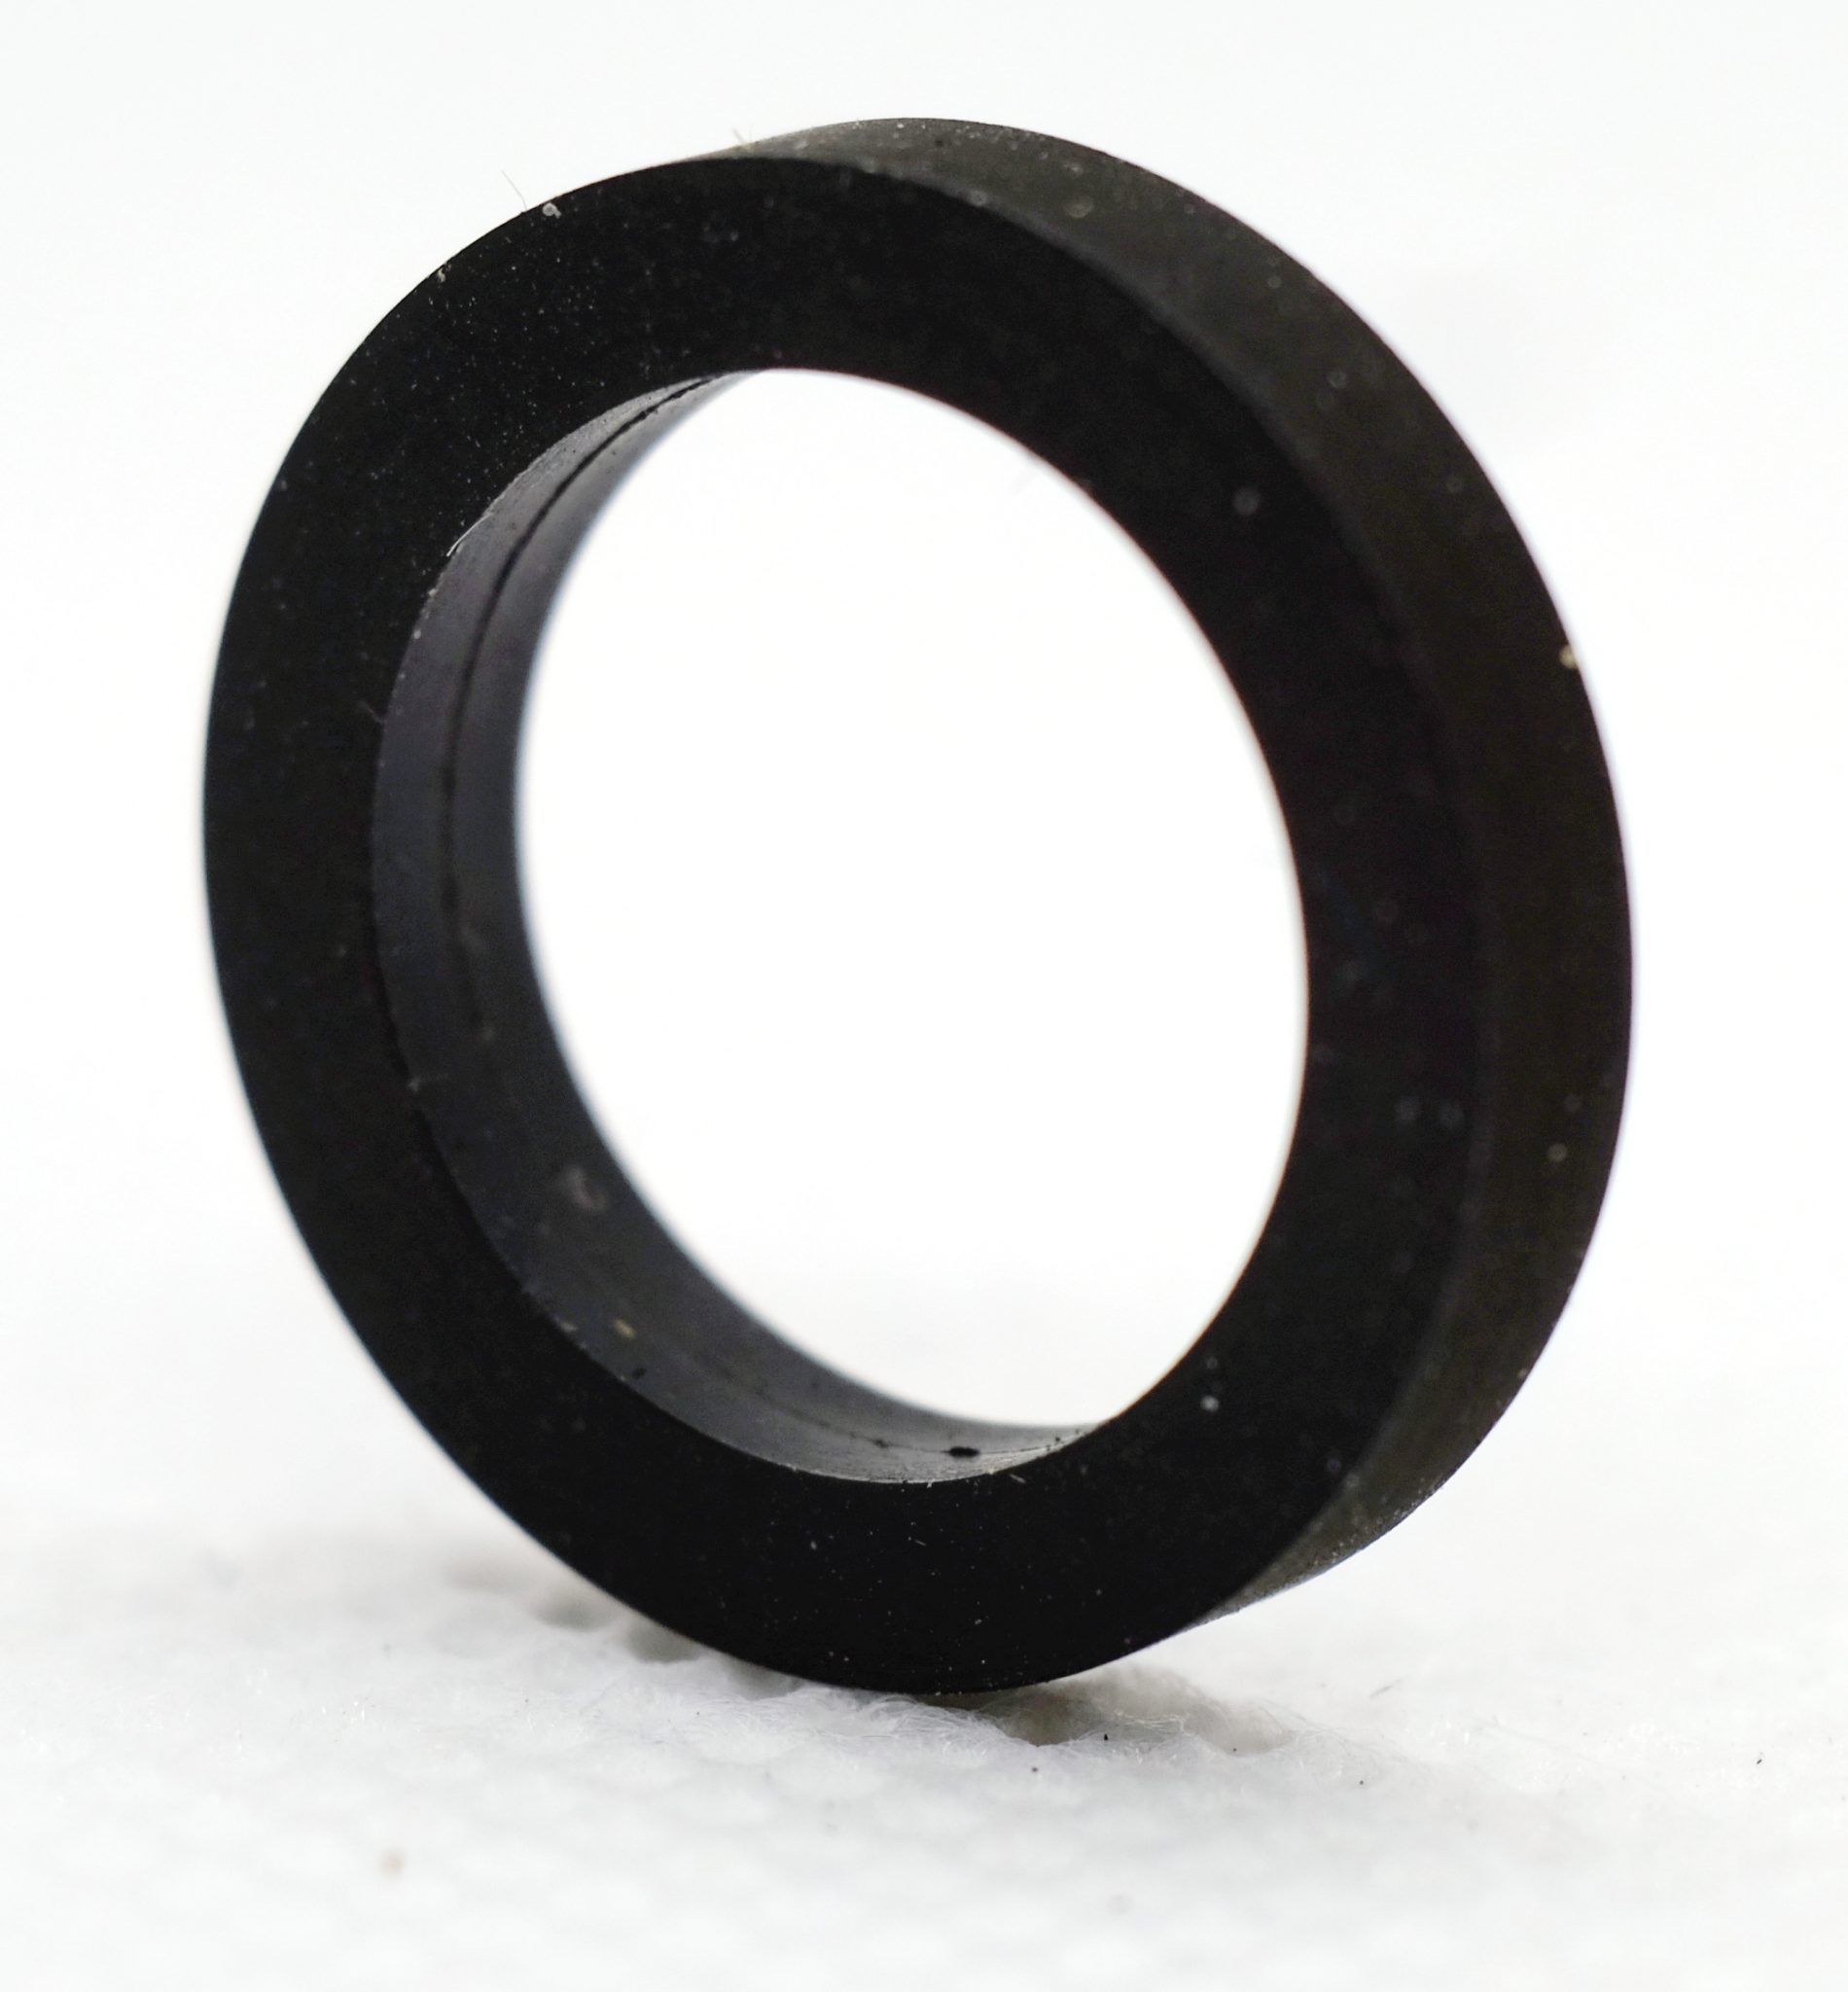 idler-tire-for-pioneer-ct-676-idler-tire-for-pioneer-ct-676-cassette